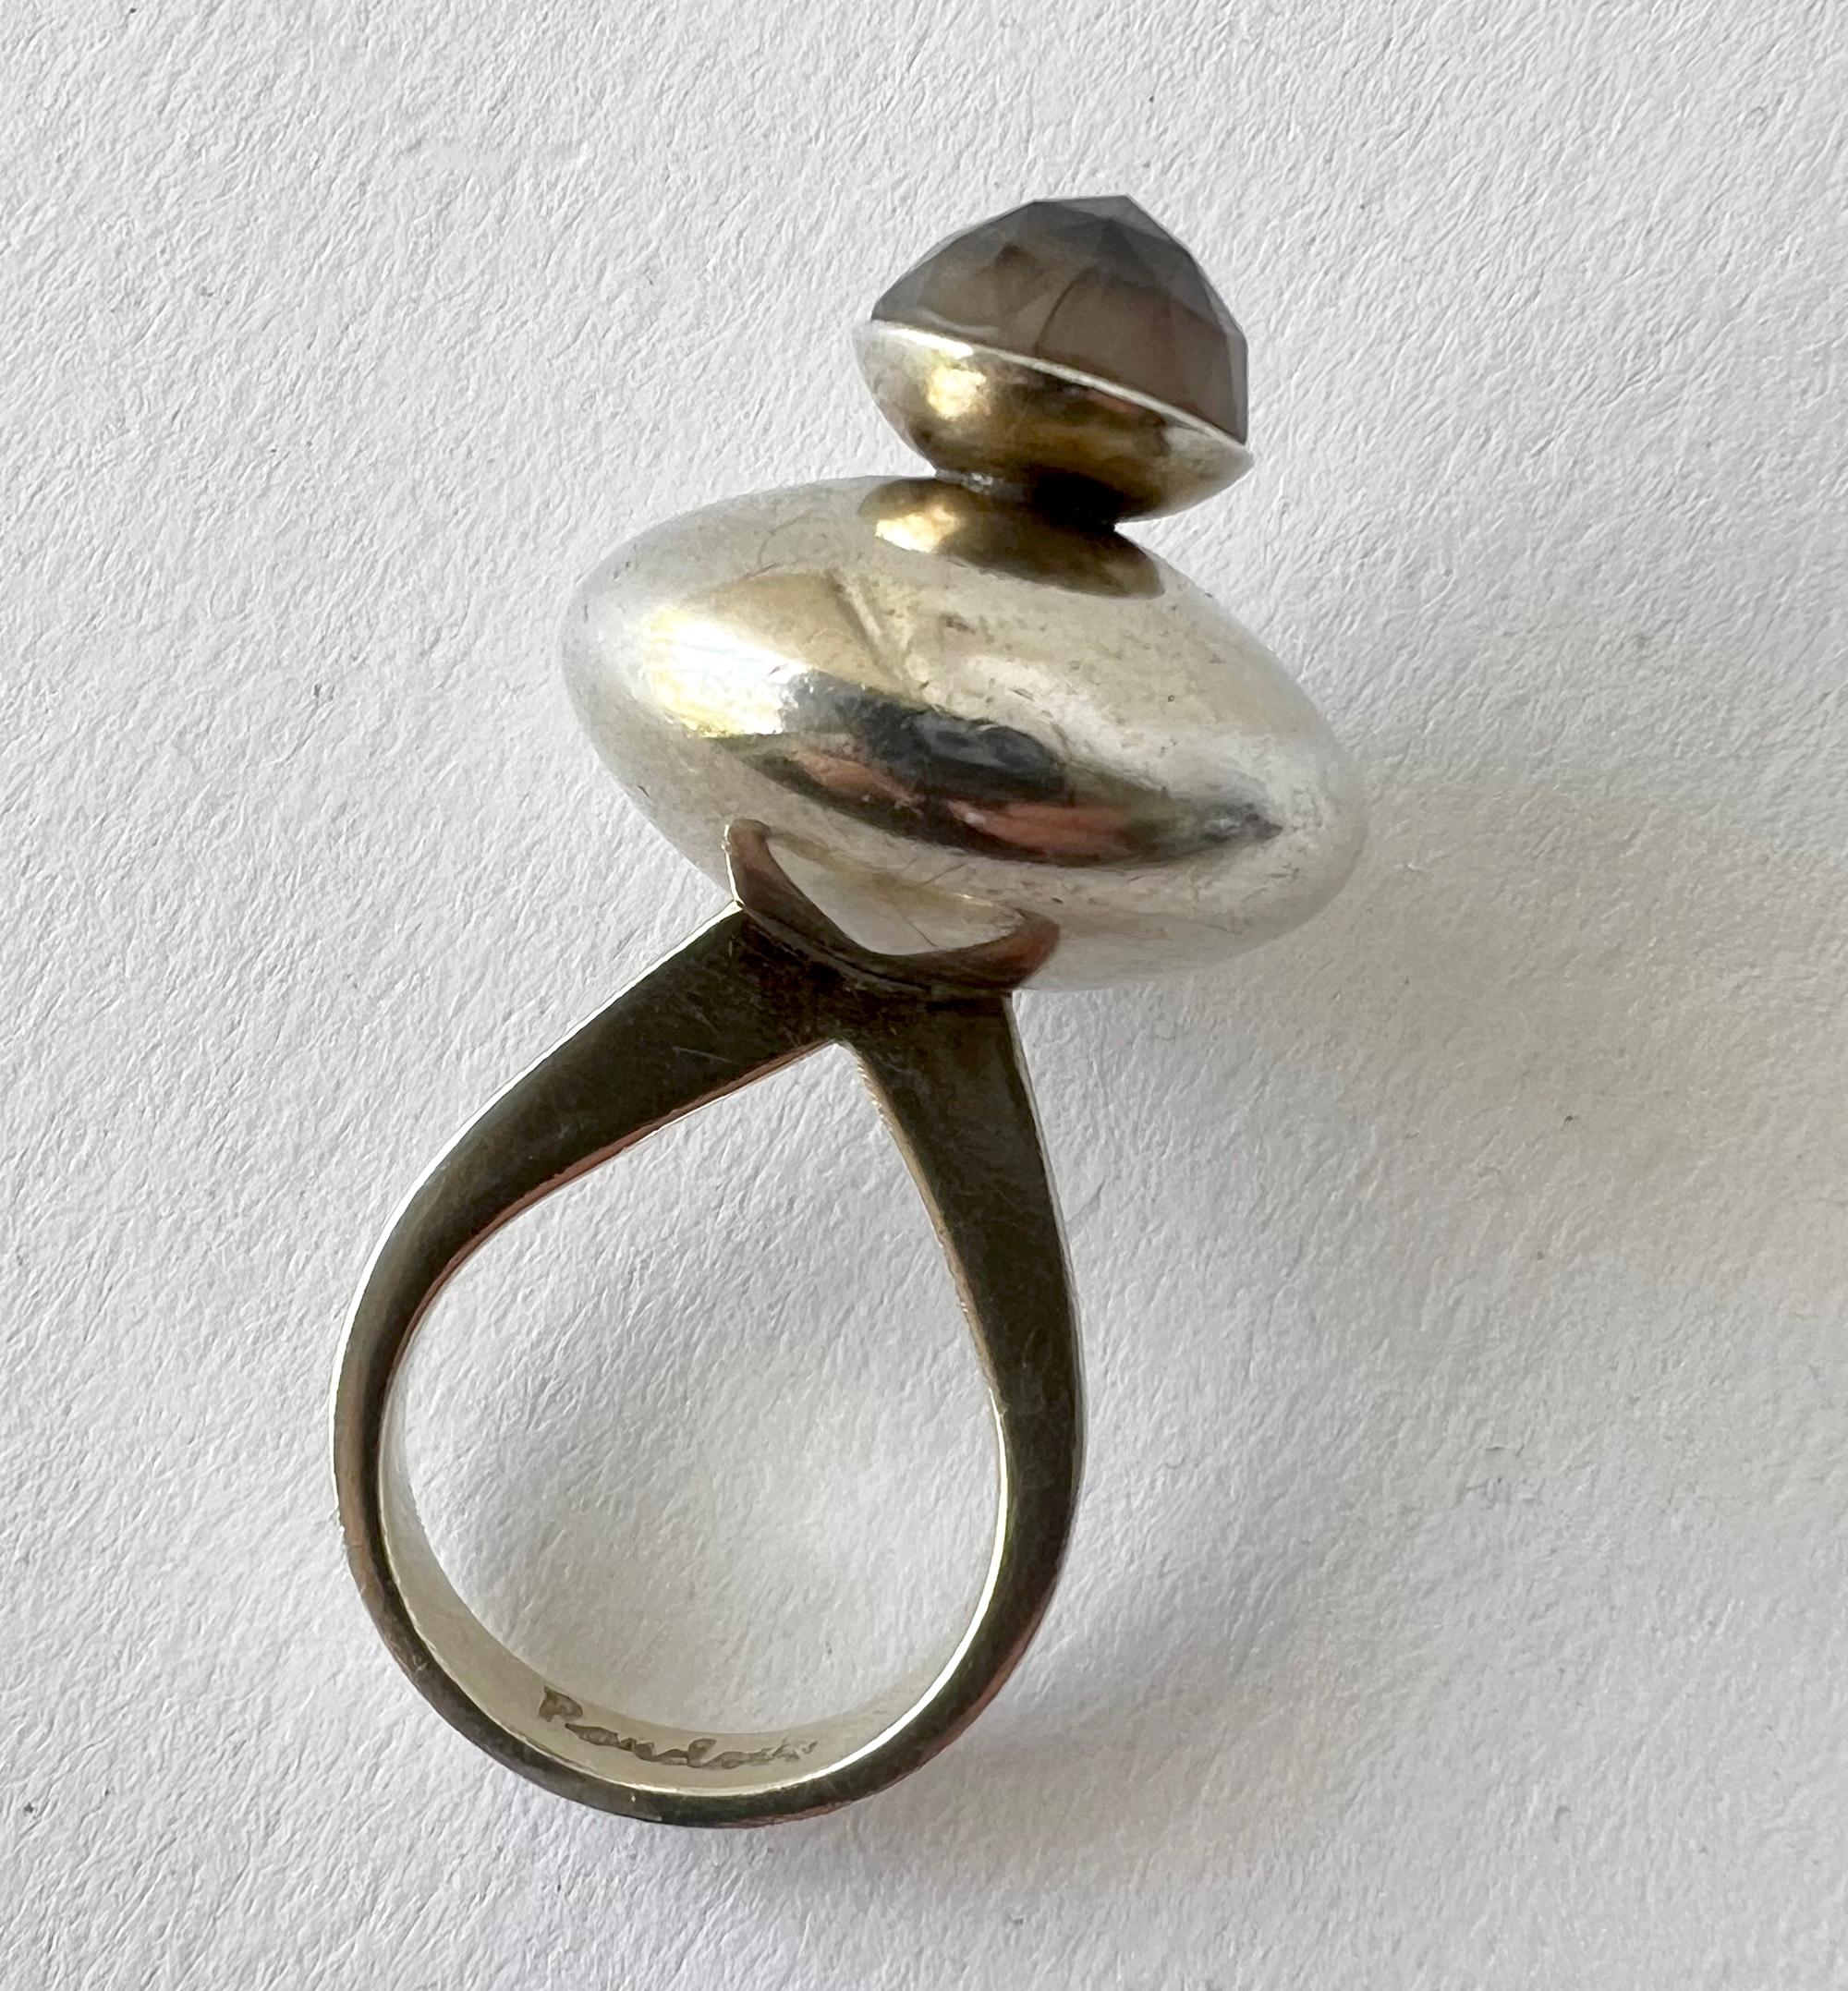 Sterling silver and faceted quartz cocktail ring created by master jeweler, artist and designer Earl Pardon of New York. Ring is a finger size 6.75 to 7 due to its unusual shaped shank.  Signed Pardon and in good vintage 1960s condition showing some